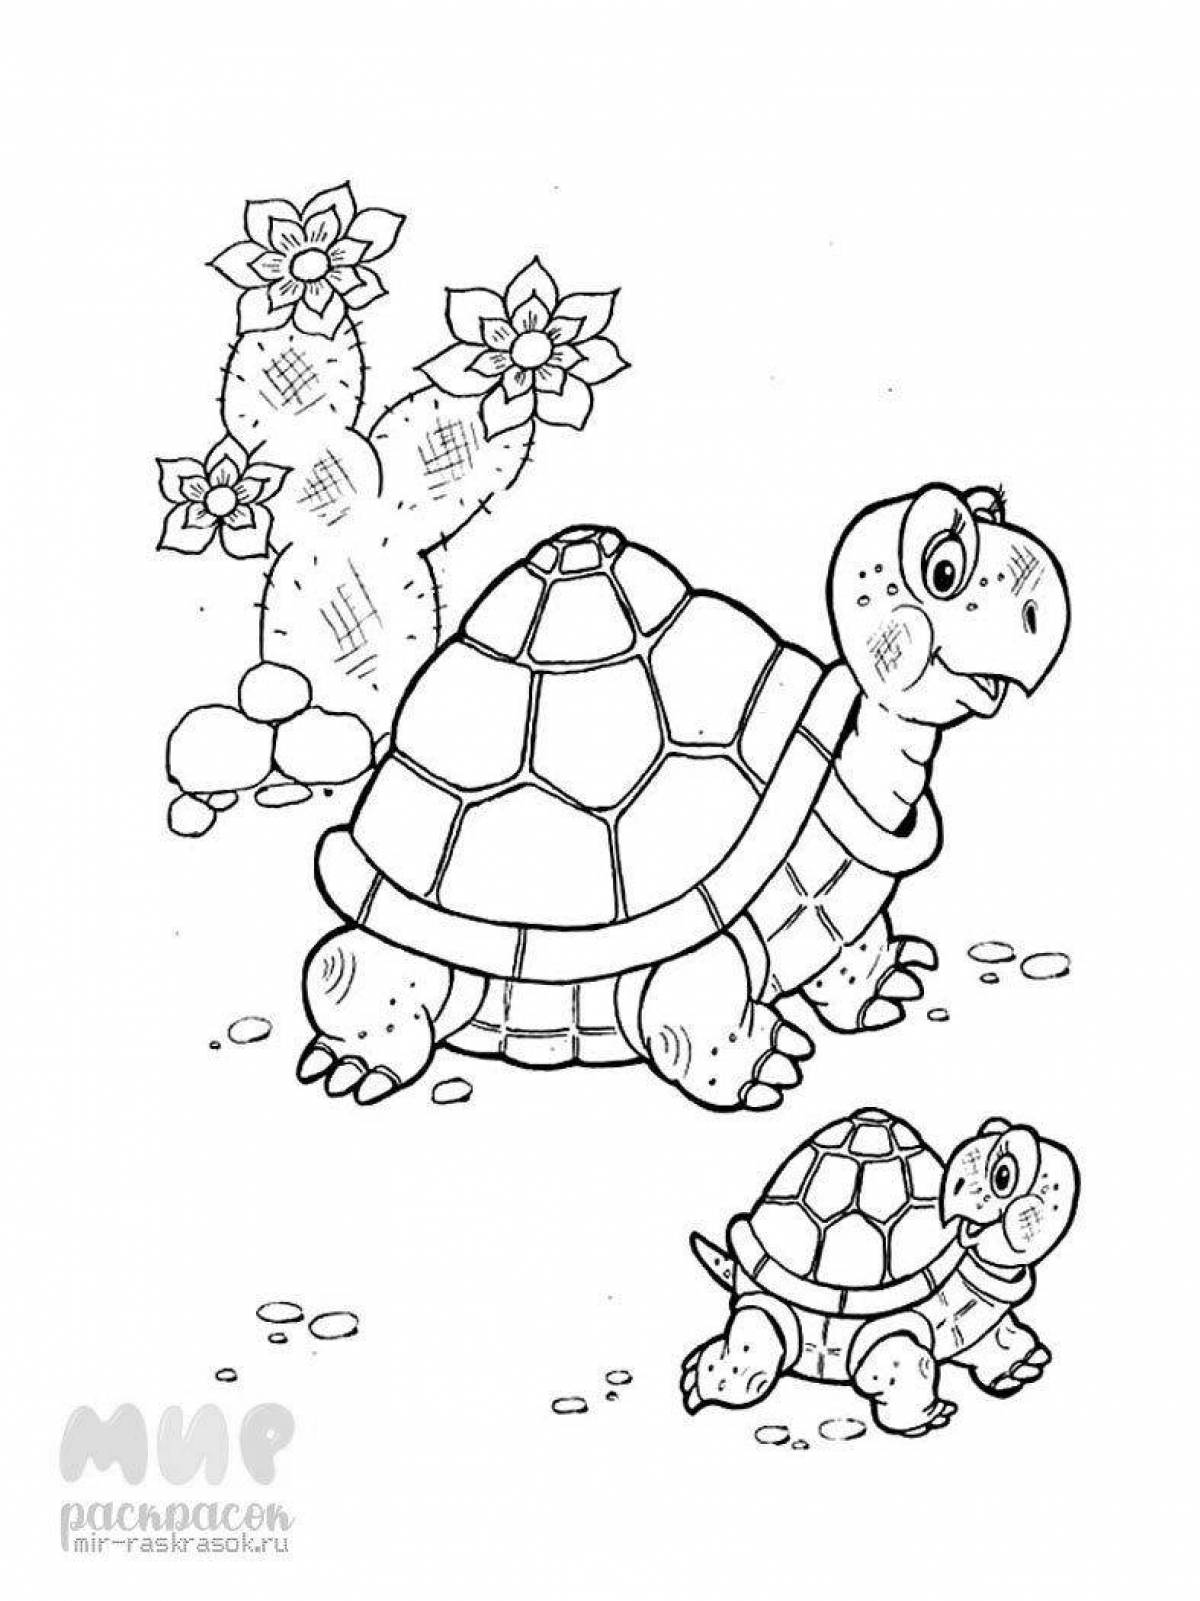 Colouring turtle for children 6-7 years old